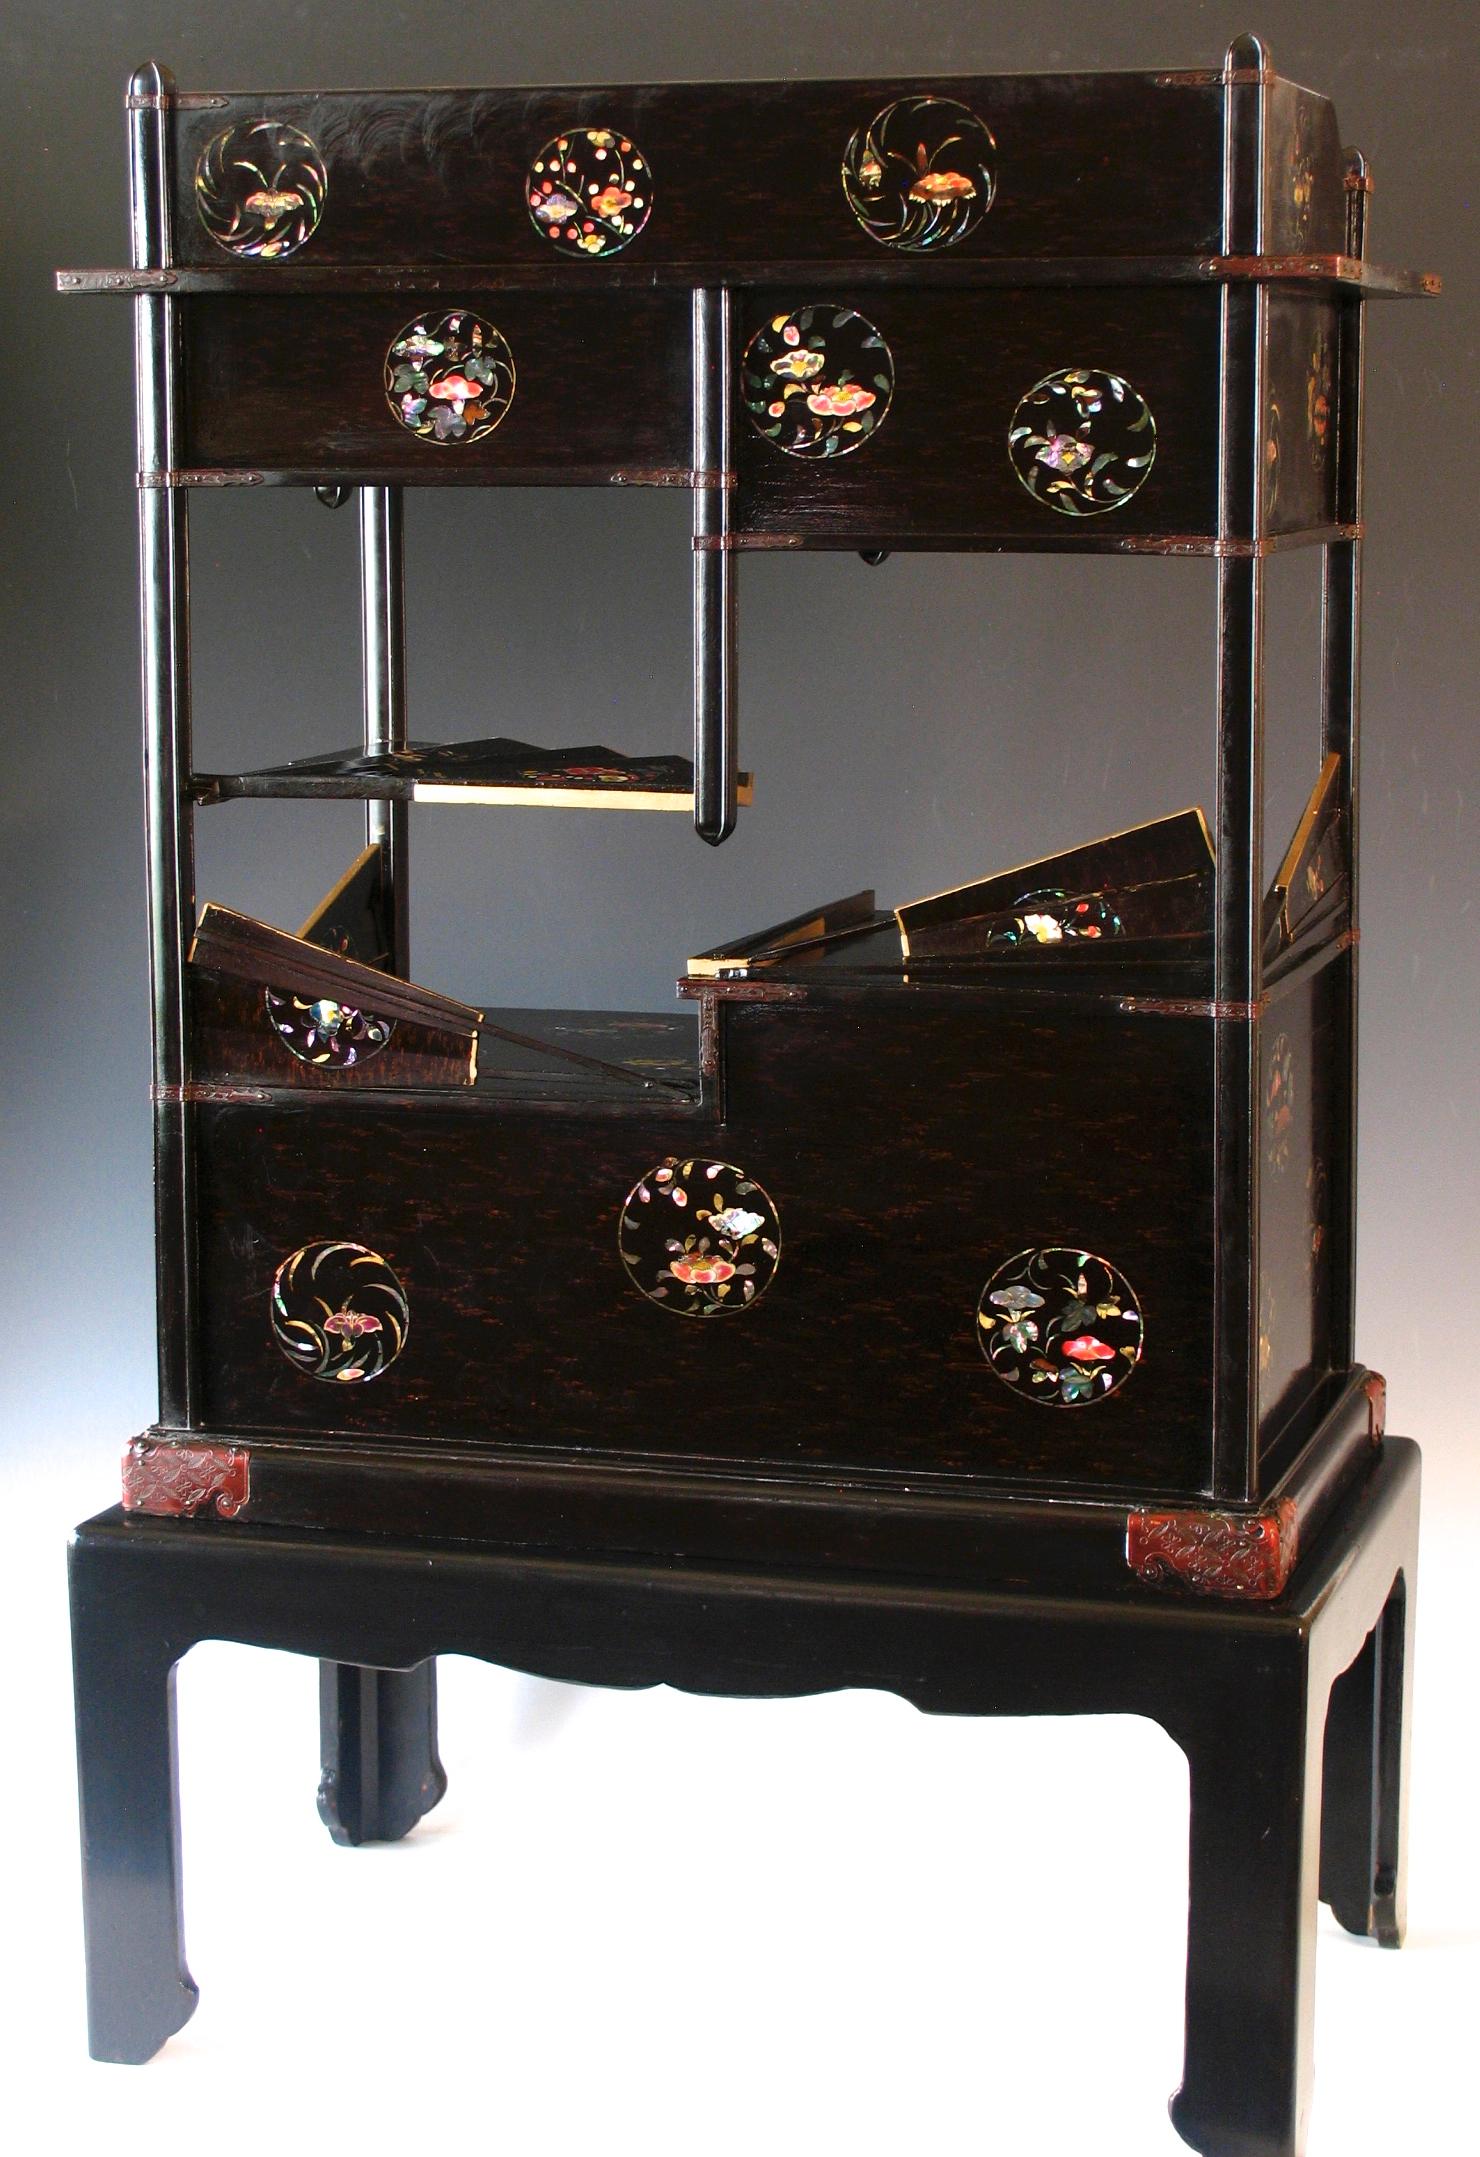 19th Century Japanese Nagasaki Lacquer and Mother-of-Pearl Inlay Display Cabinet For Sale